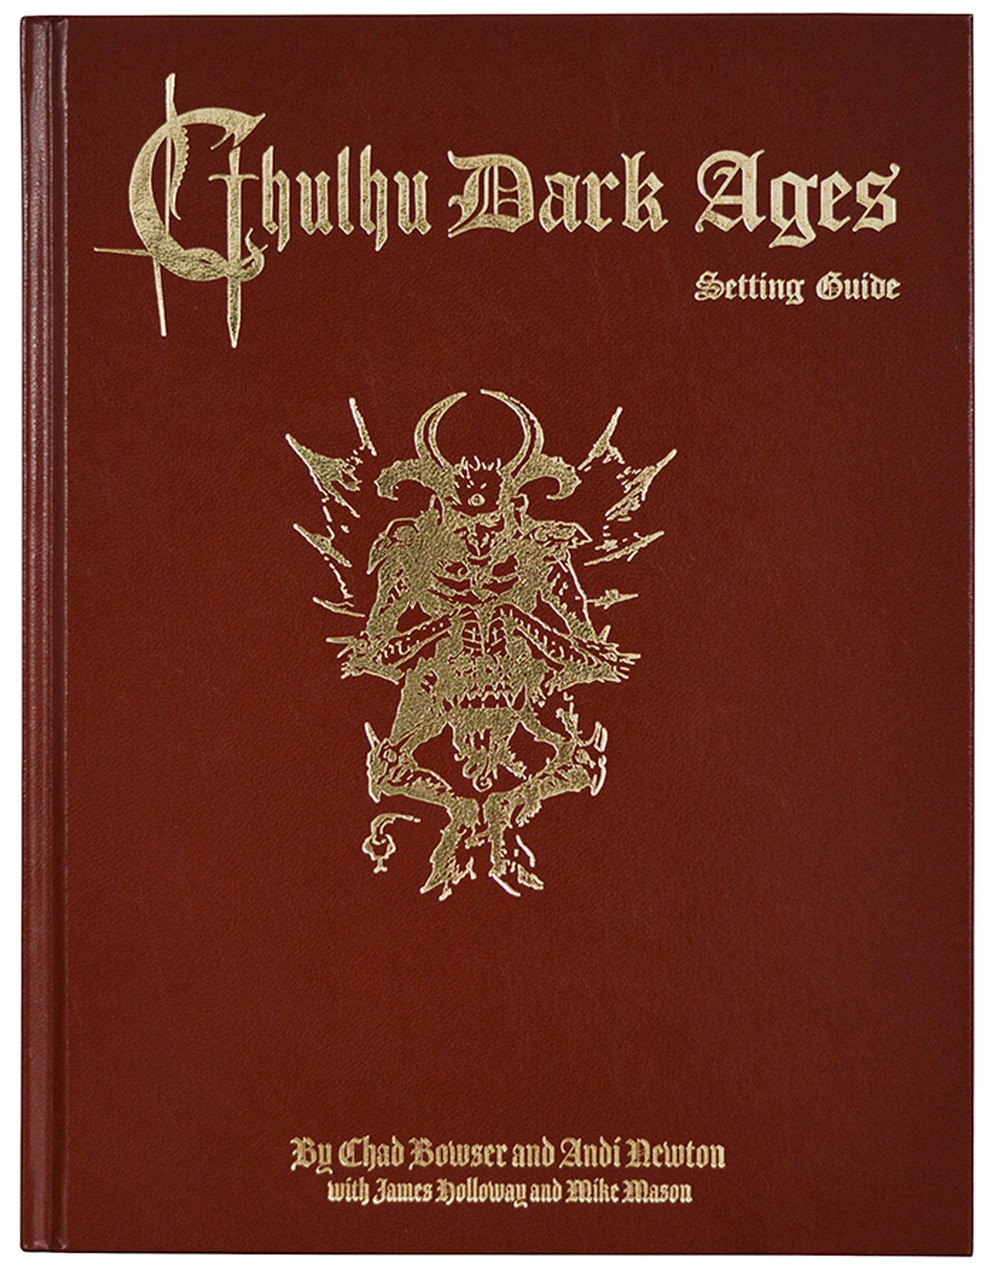 Cthulhu Dark Ages Setting Guide Premium Edition - Used